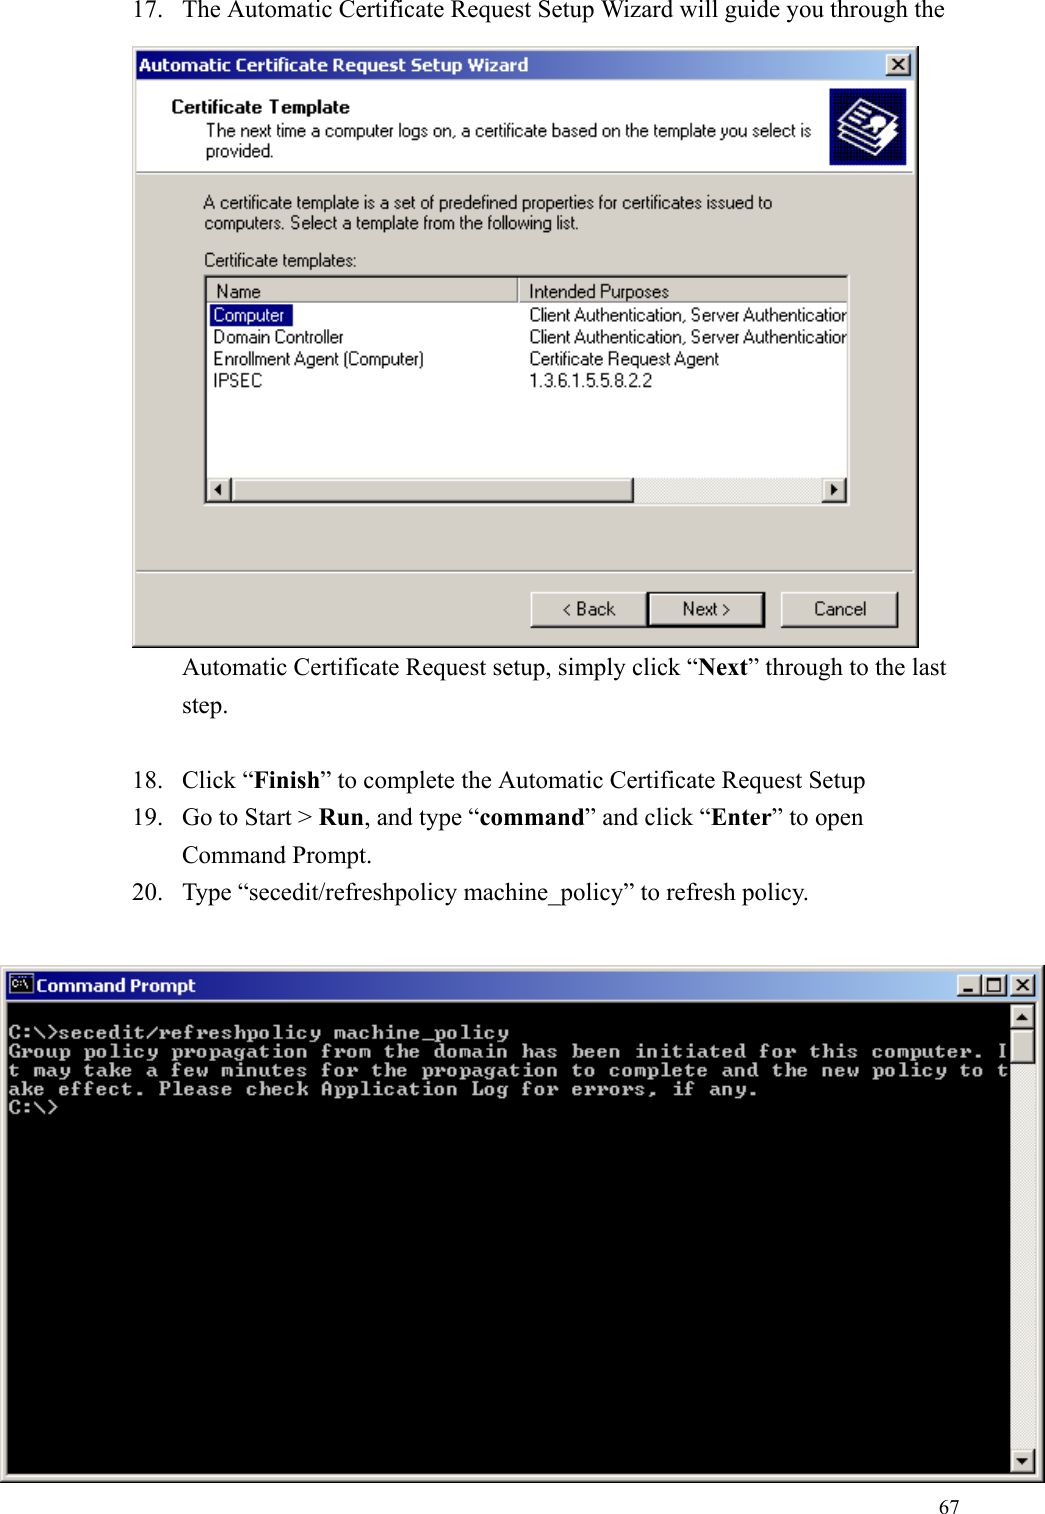 6717. The Automatic Certificate Request Setup Wizard will guide you through theAutomatic Certificate Request setup, simply click “Next” through to the laststep.18. Click “Finish” to complete the Automatic Certificate Request Setup19. Go to Start &gt; Run, and type “command” and click “Enter” to openCommand Prompt.20. Type “secedit/refreshpolicy machine_policy” to refresh policy.